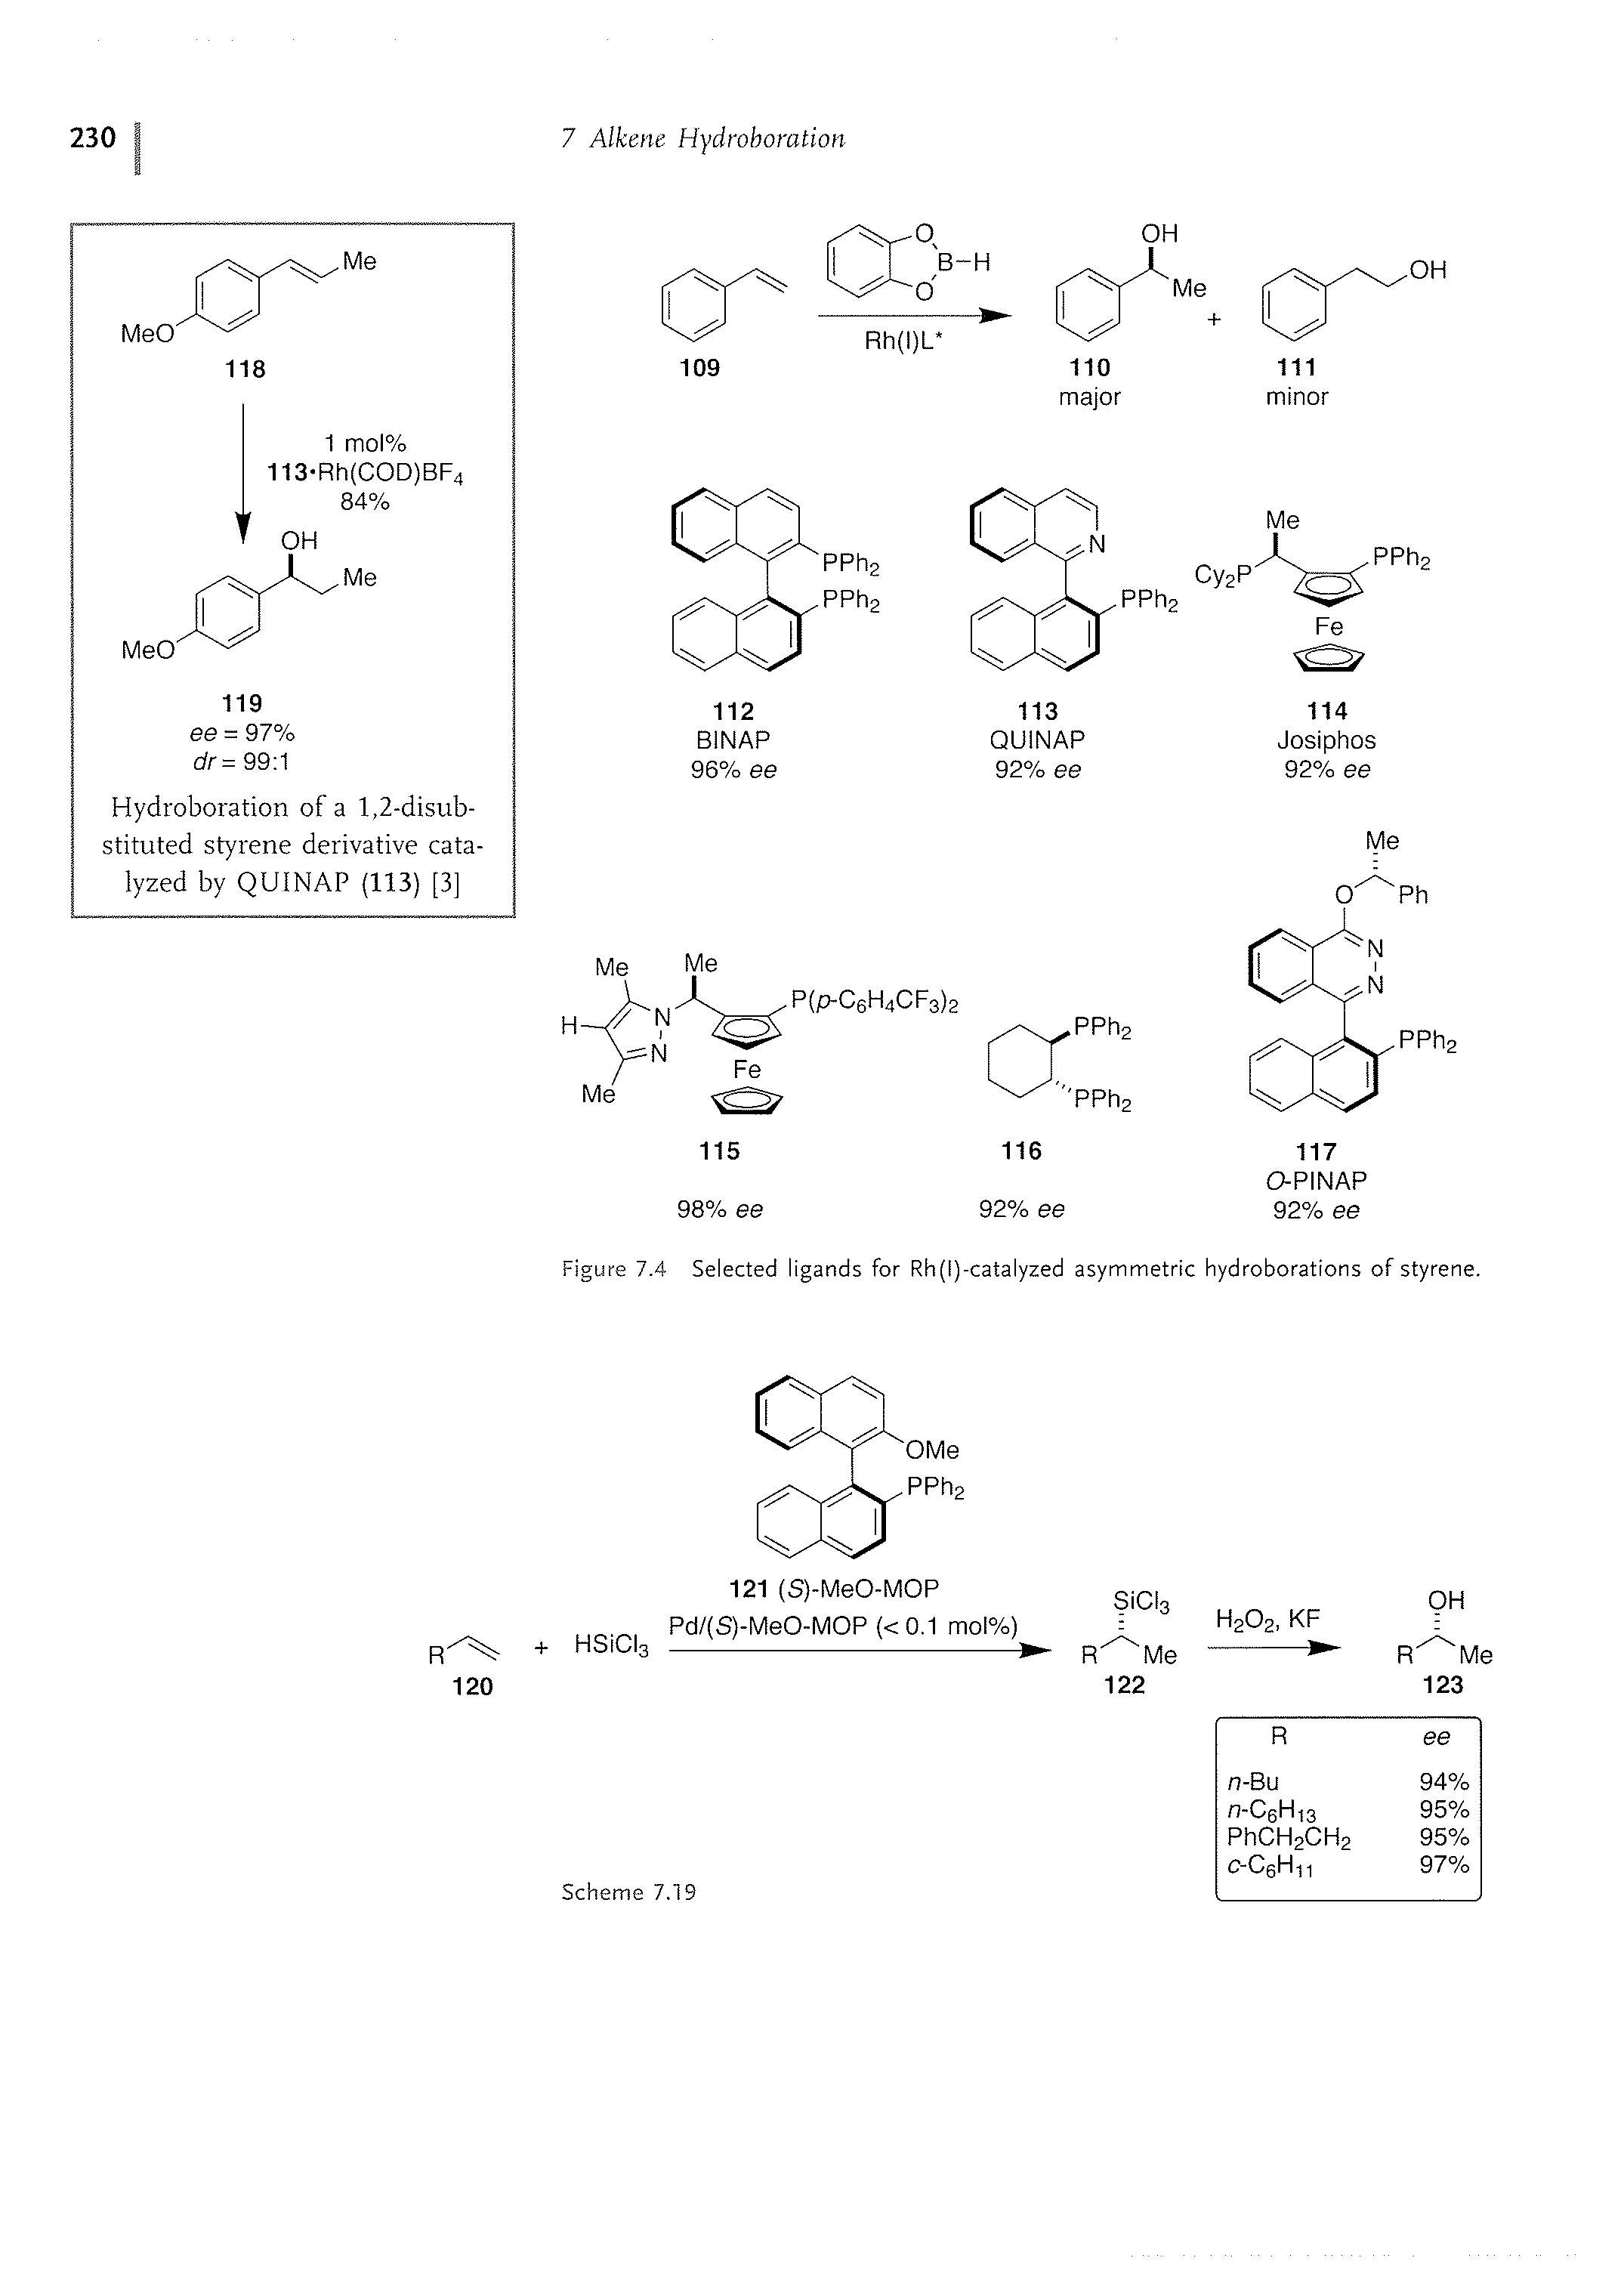 Figure 7.4 Selected ligands for Rh(l)-catalyzed asymmetric hydroborations of styrene.